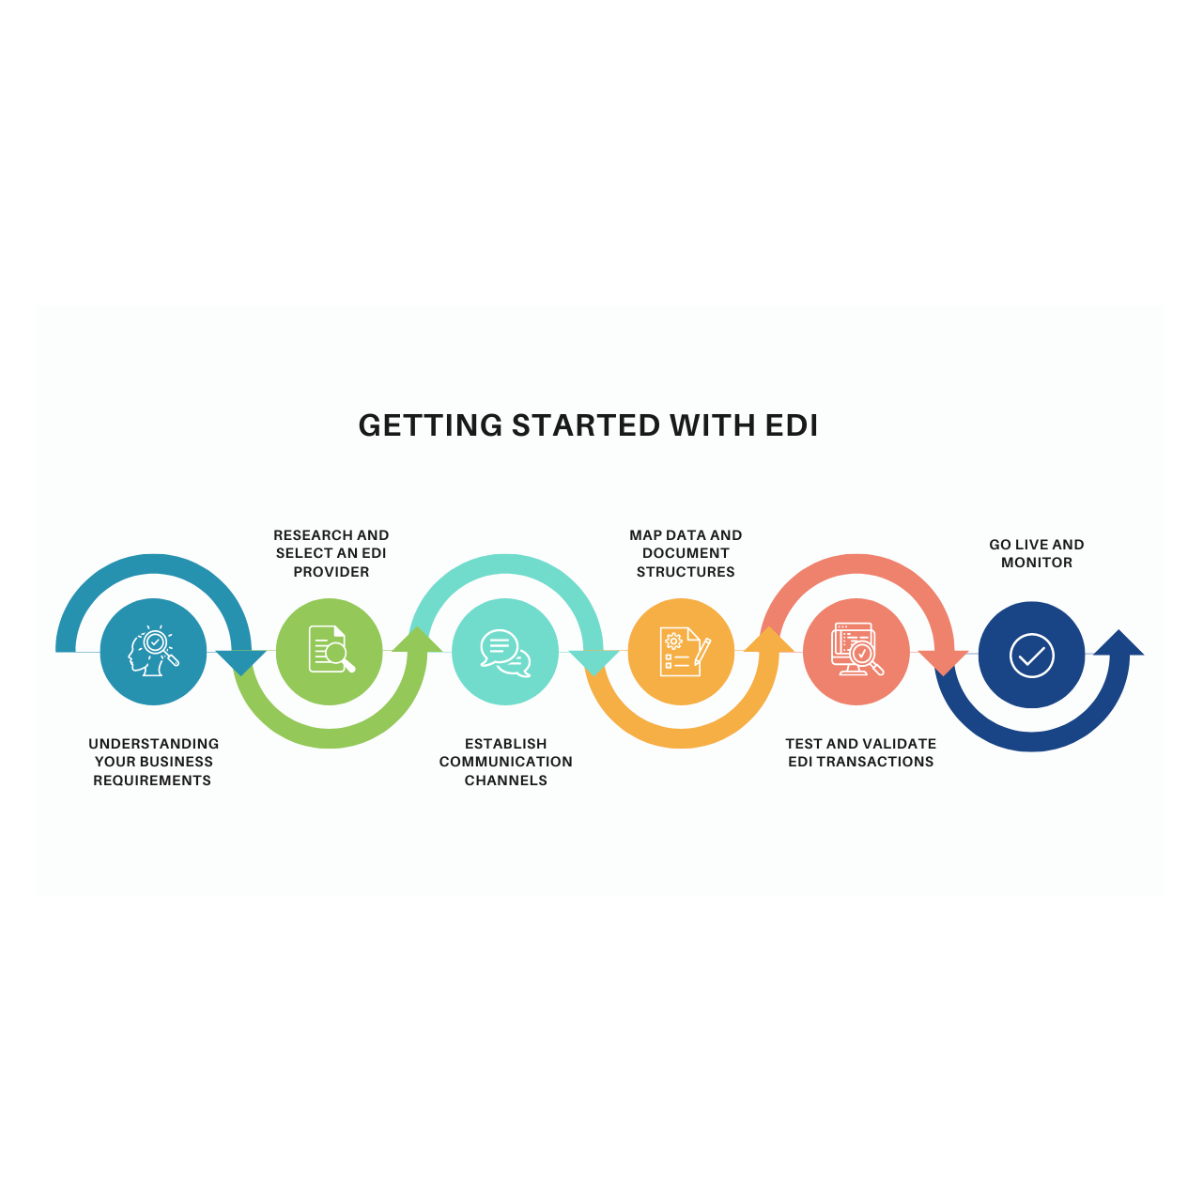 Get started with EDI - Commport Communications